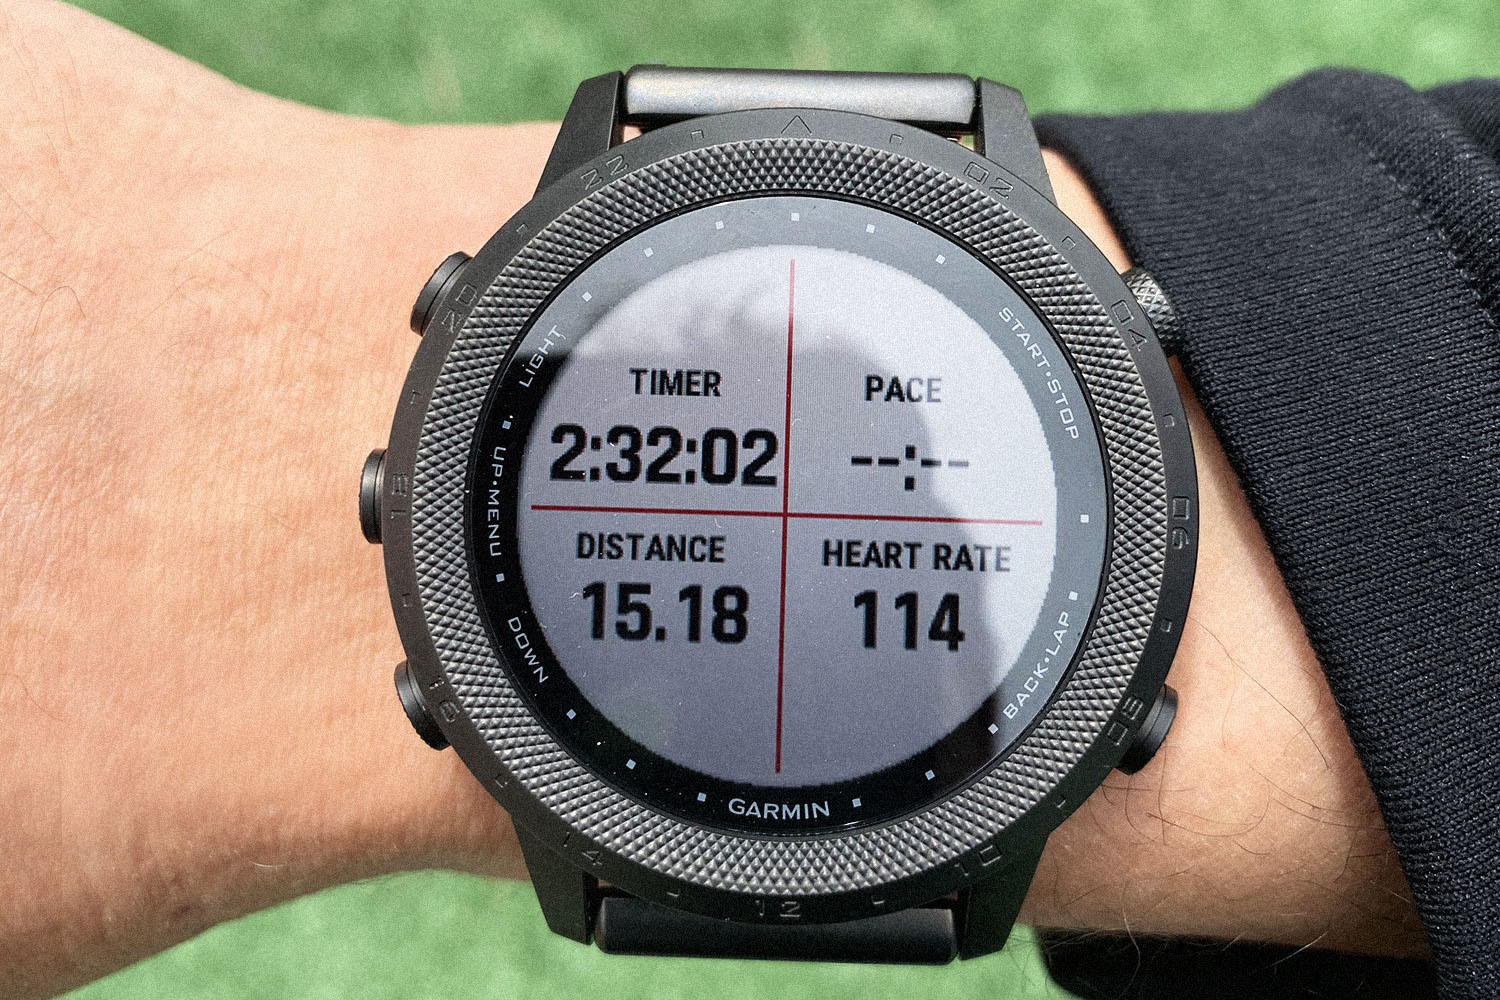 The Garmin MARQ is the best smartwatch on the market